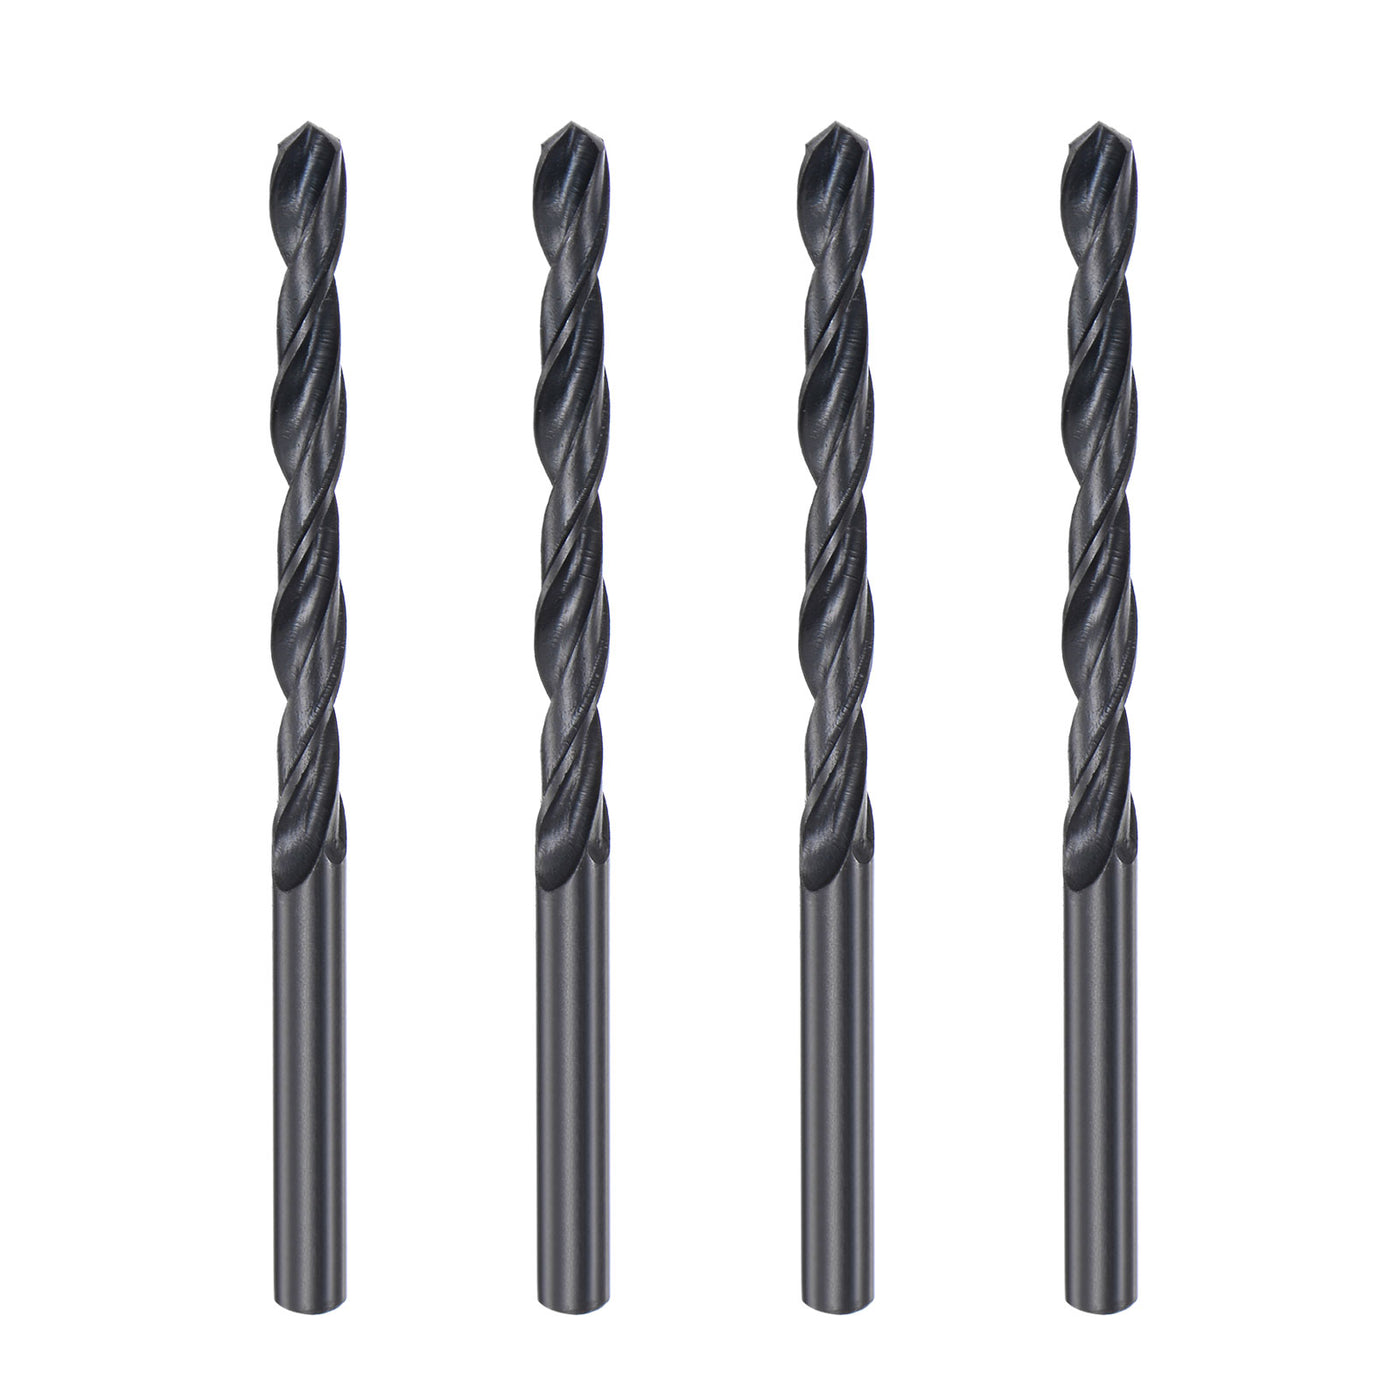 uxcell Uxcell High Speed Steel Twist Drill Bit, 5.7mm Fully Ground Black Oxide 92mm Long 4Pcs